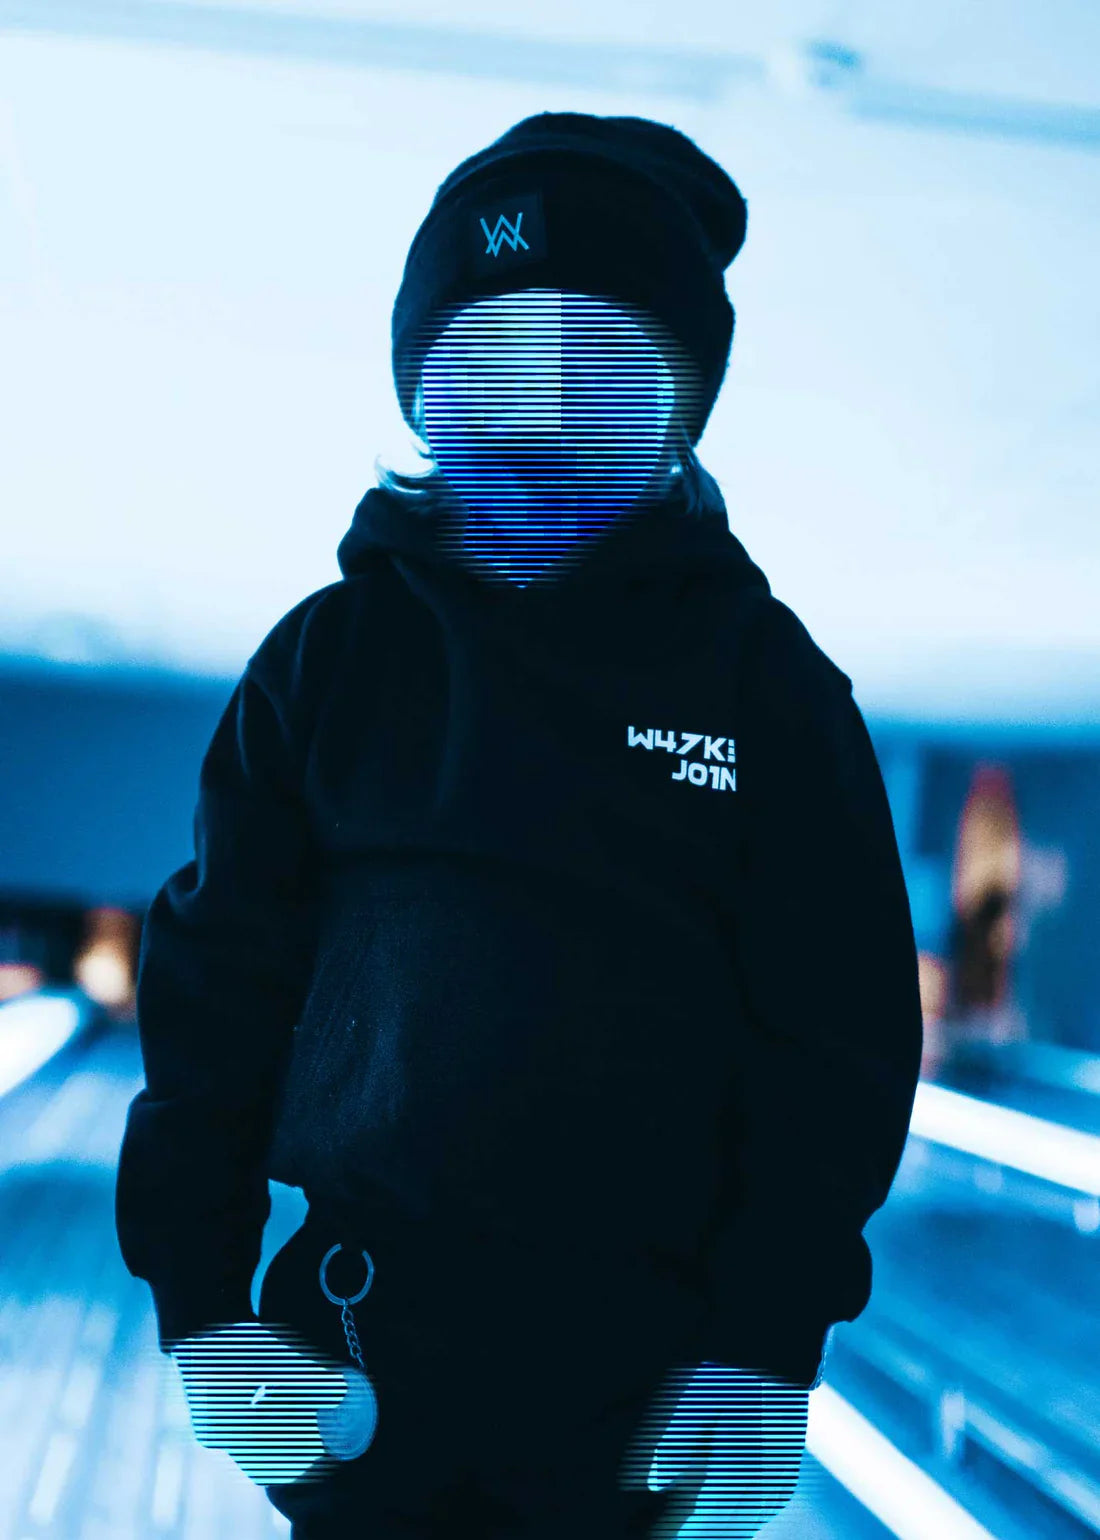 Back view of a child wearing the Alan Walker hoodie, looking at a DJ set, symbolizing a future in music.